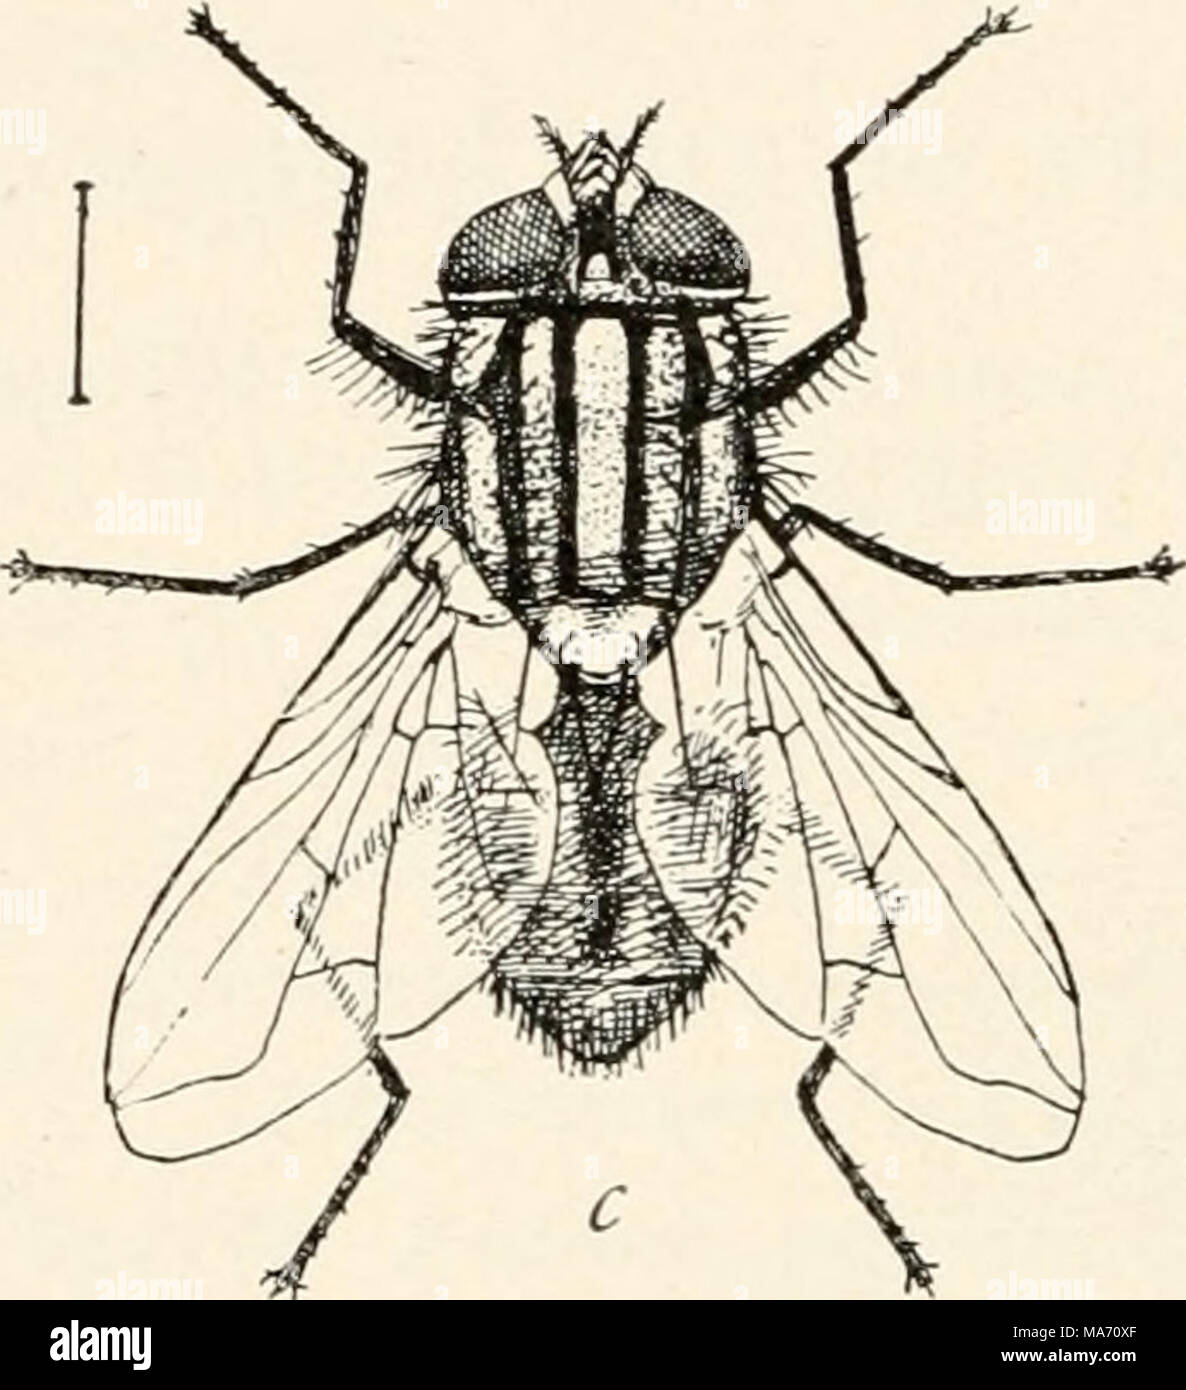 . Elementary entomology . FIG. 346. The house-fly. (Enlarged) a, larva, or maggot; b, puparium ; c, adult. (After Howard, United States Department of Agriculture) single pair of wings (except the male scale insects), and the name of the order becomes significant, being derived from dis (two) and pteron (wing). The hind-wings are replaced by a pair of odd, club-shaped organs, called balancers, or halteres, which seem to be concerned with main- taining the equilibrium of the insect and are, of ccurse, peculiar to this order. A few of the parasitic families are wingless. The mouth-parts have alre Stock Photo